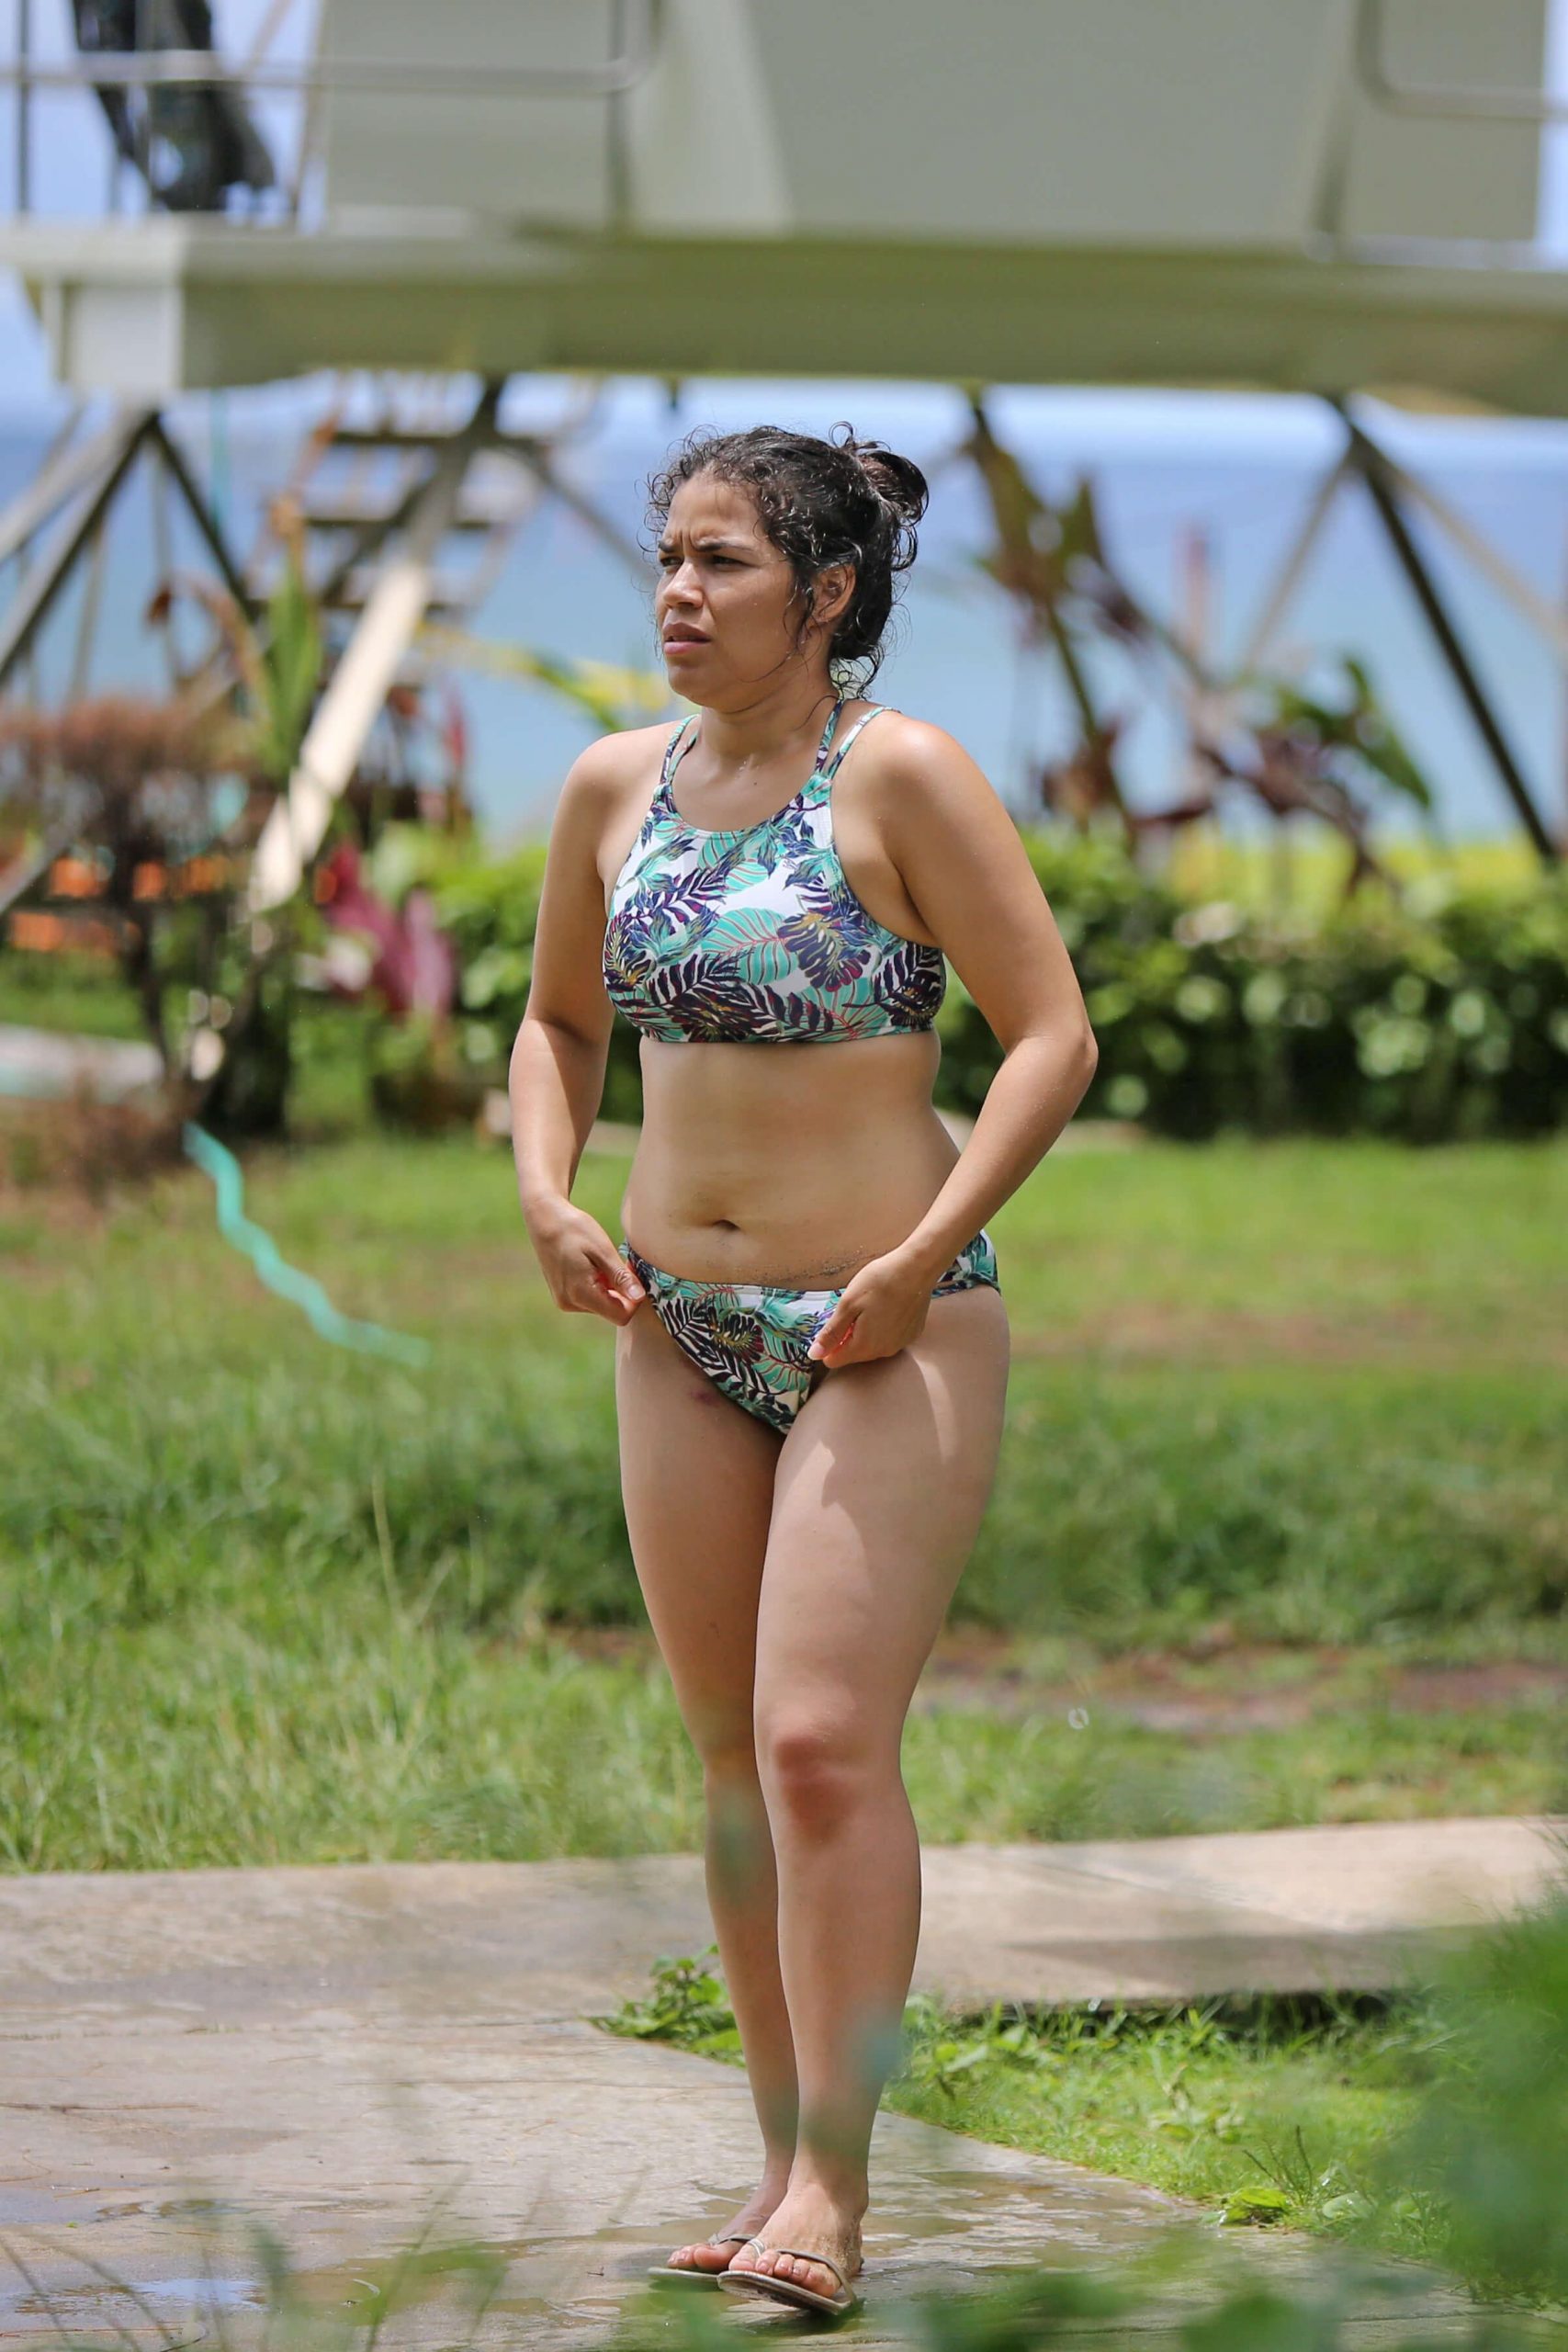 51 Sexy America Ferrera Boobs Pictures Reveal Her Lofty And Attractive Physique 9